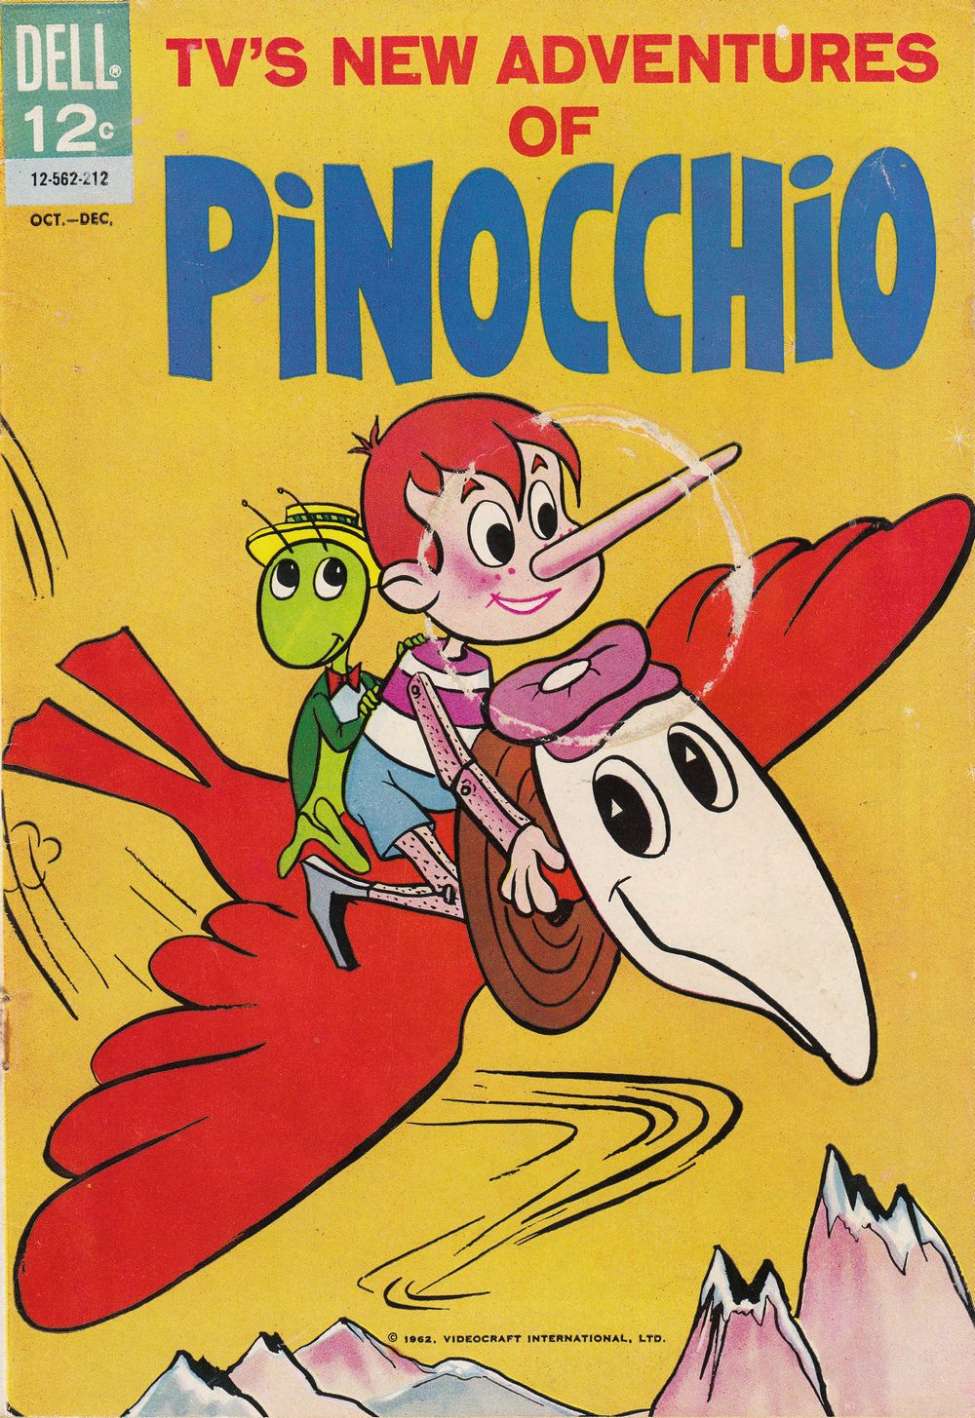 Comic Book Cover For New Adventures of Pinocchio 1